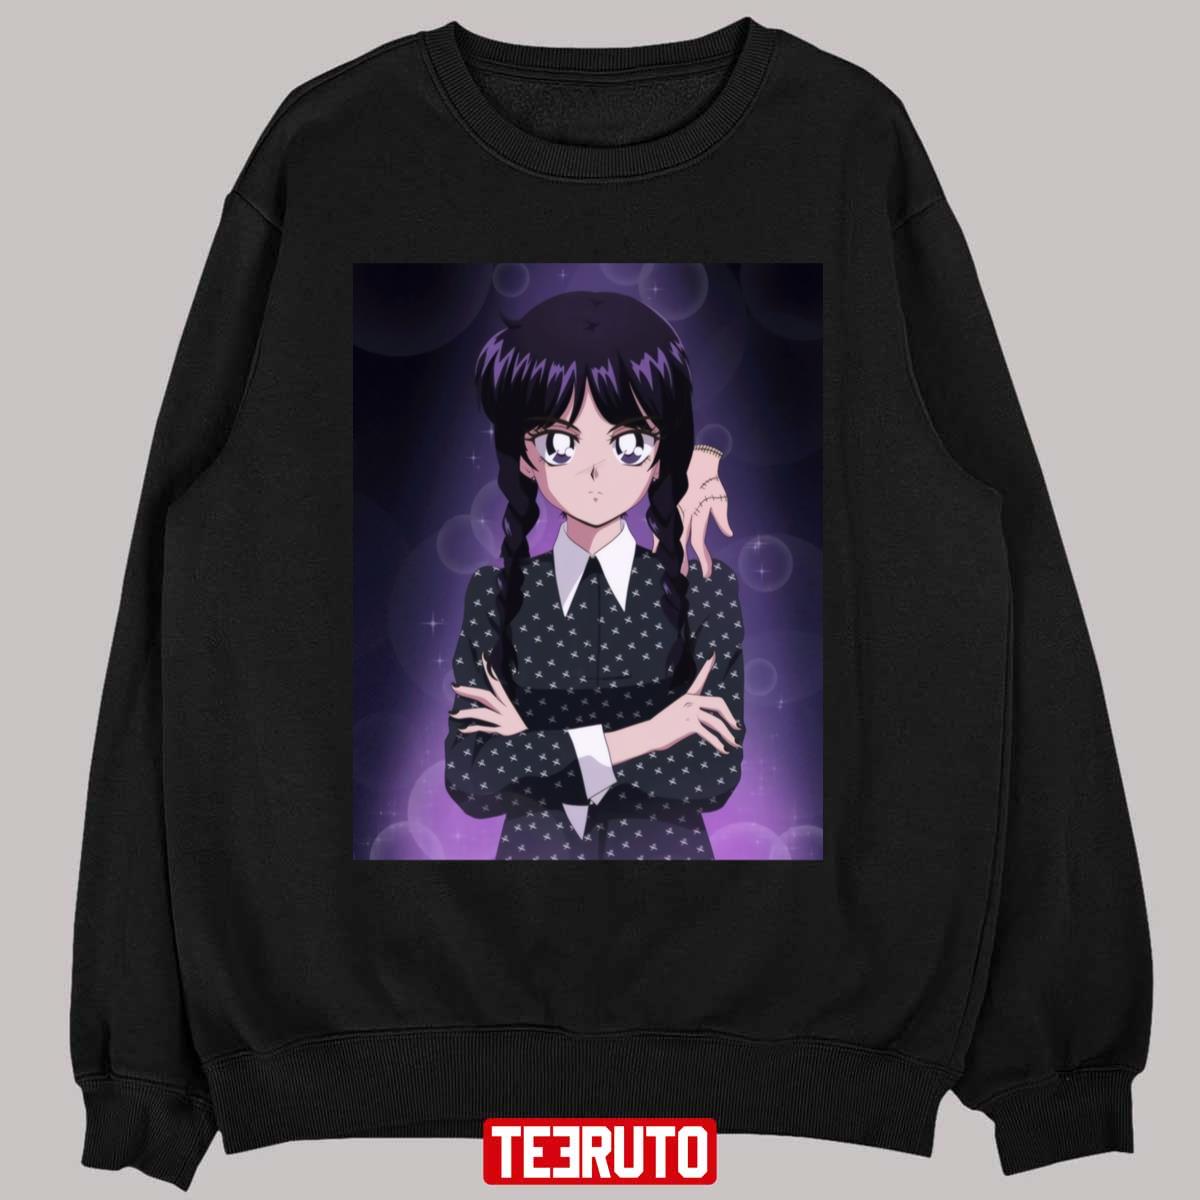 Thing And Wednesday Addams Anime Version Sailor Moon Inspired Art Unisex  T-Shirt - Teeruto